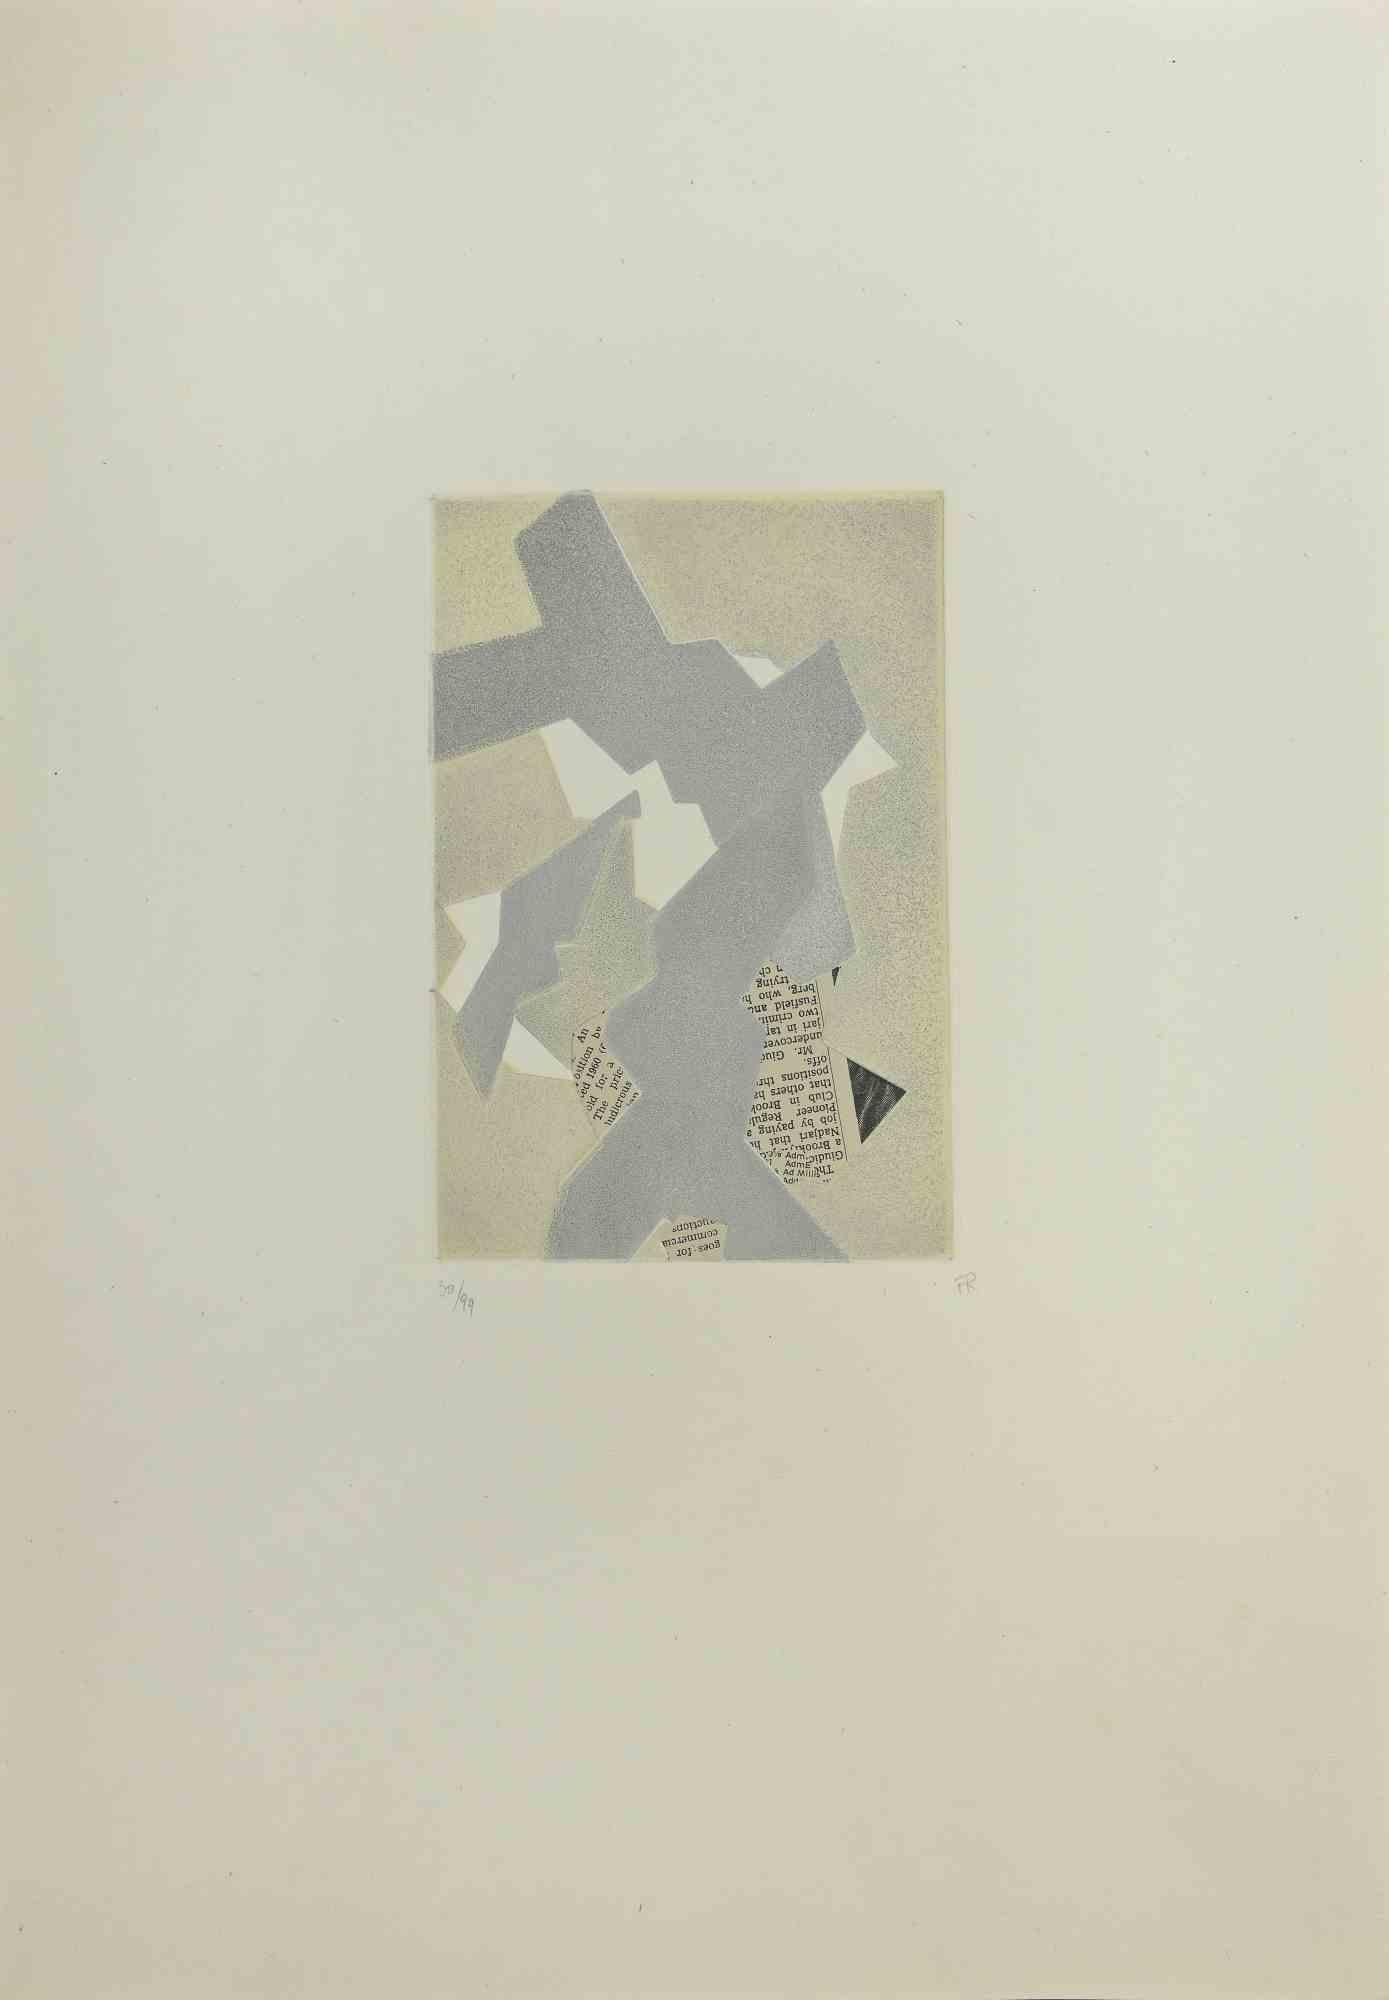 Abstract Composition is an etching and collage on paper realized by Hans Richter in 1973. 

Published by La Nuova Foglio, a publishing house of Macerata.

Monogrammed by Frida Richter and numbered in pencil on the lower margin. Edition number